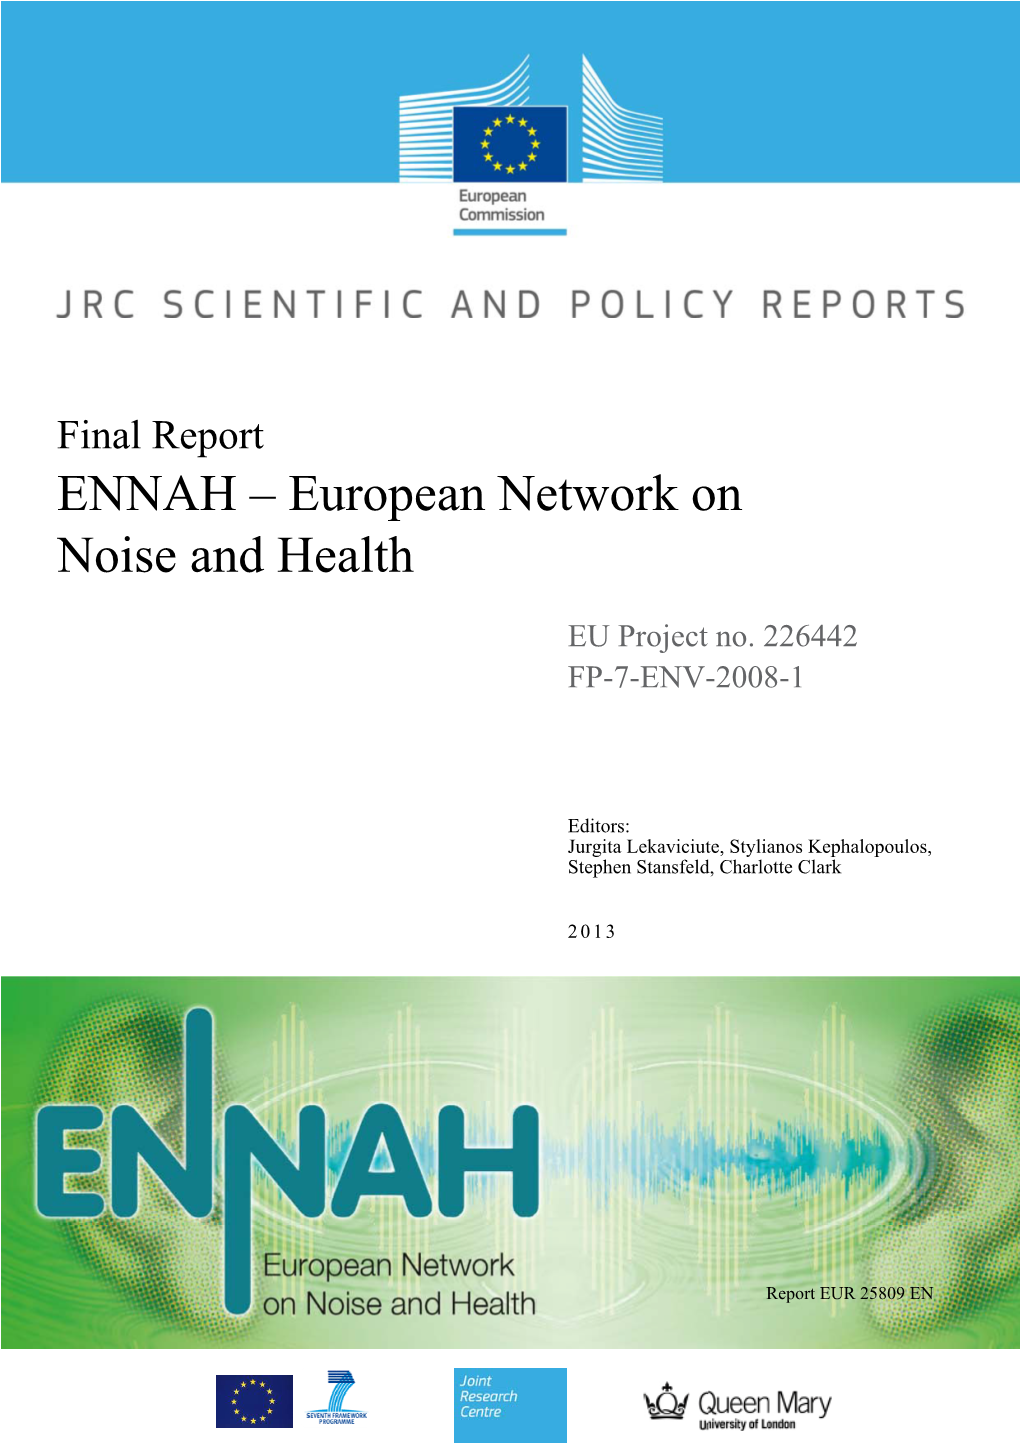 Final Report ENNAH – European Network on Noise and Health